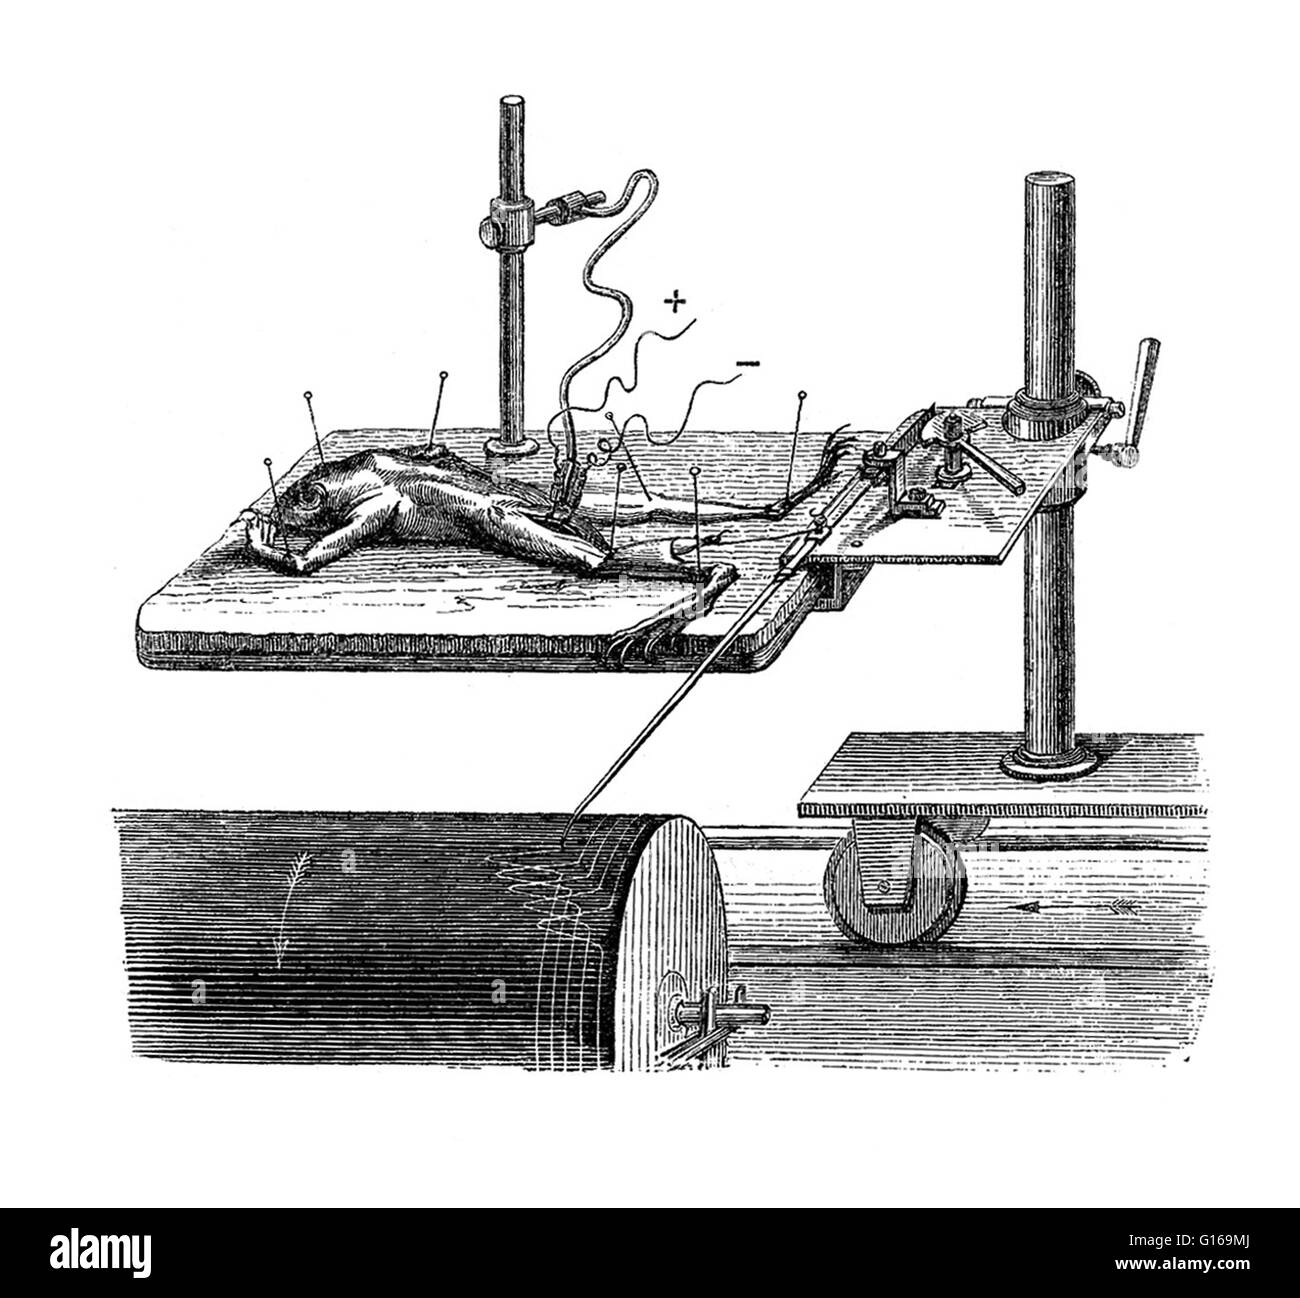 The Animal Machine, Marey's Myograph, 1873. Best known for his key participation in the development of chronophotography, French scientist Étienne Jules-Marey is also credited for perfecting Hermann von Helmholtz's myograph. A myograph is a device capable of recording the force generated by a contracting muscle. Marey's description of the illustration taken from the English edition of his book, The Animal Machine, Terrestrial and Aerial Locomotion, 'The frog is represented in the experiment, fixed, by means of pins, on a piece of cork. The brain and spinal marrow have been previously destroyed Stock Photo